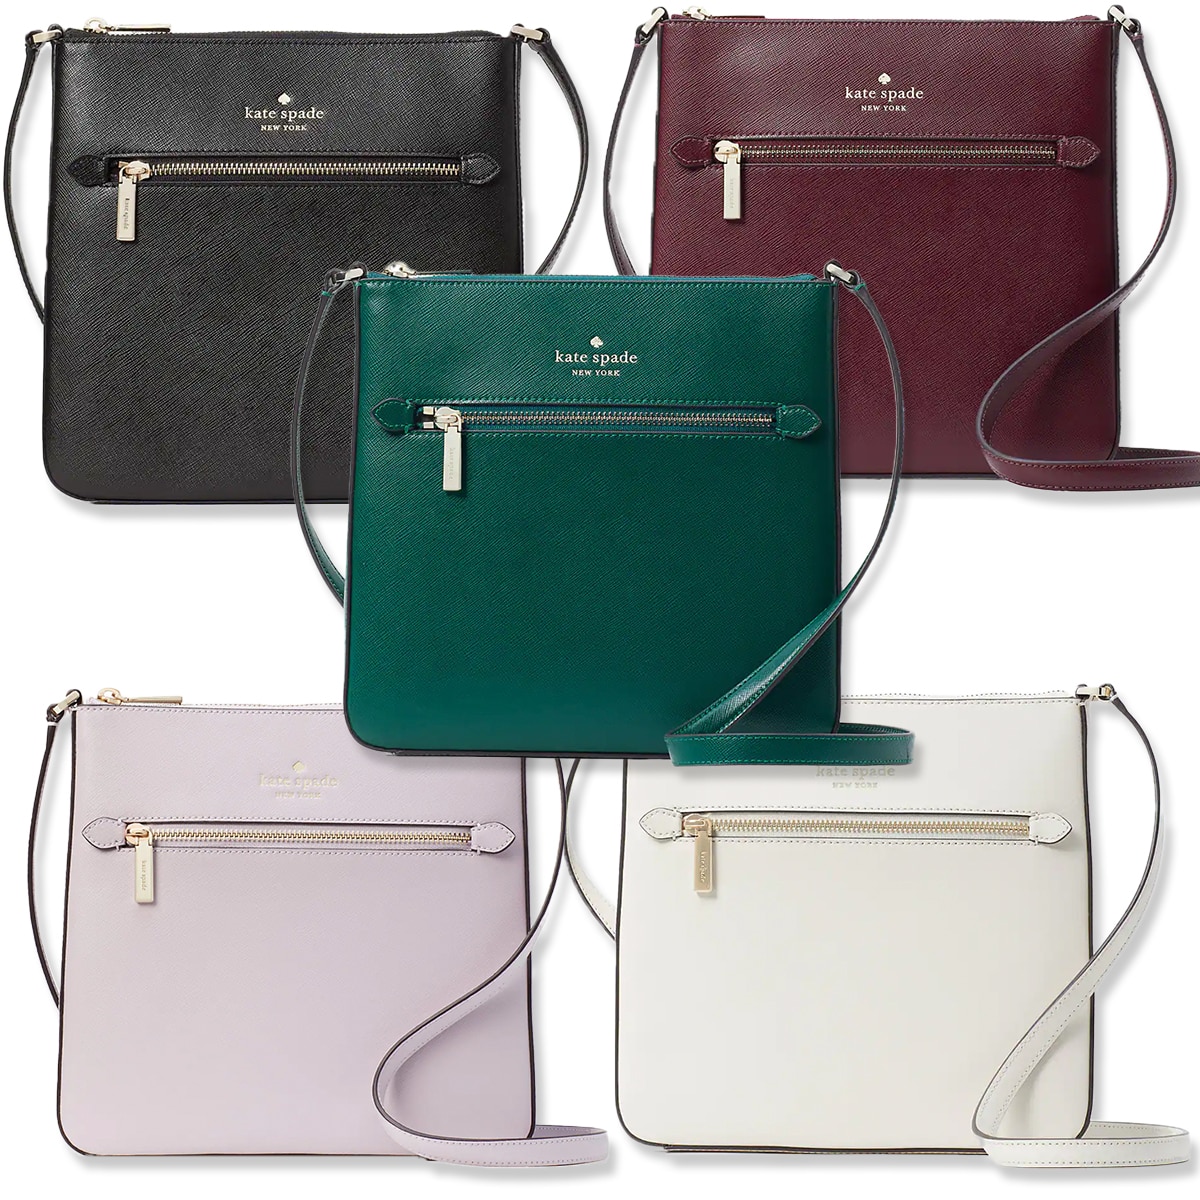 Kate Spade 24-Hour Flash Deal: Get a $300 Crossbody Bag for Just $65